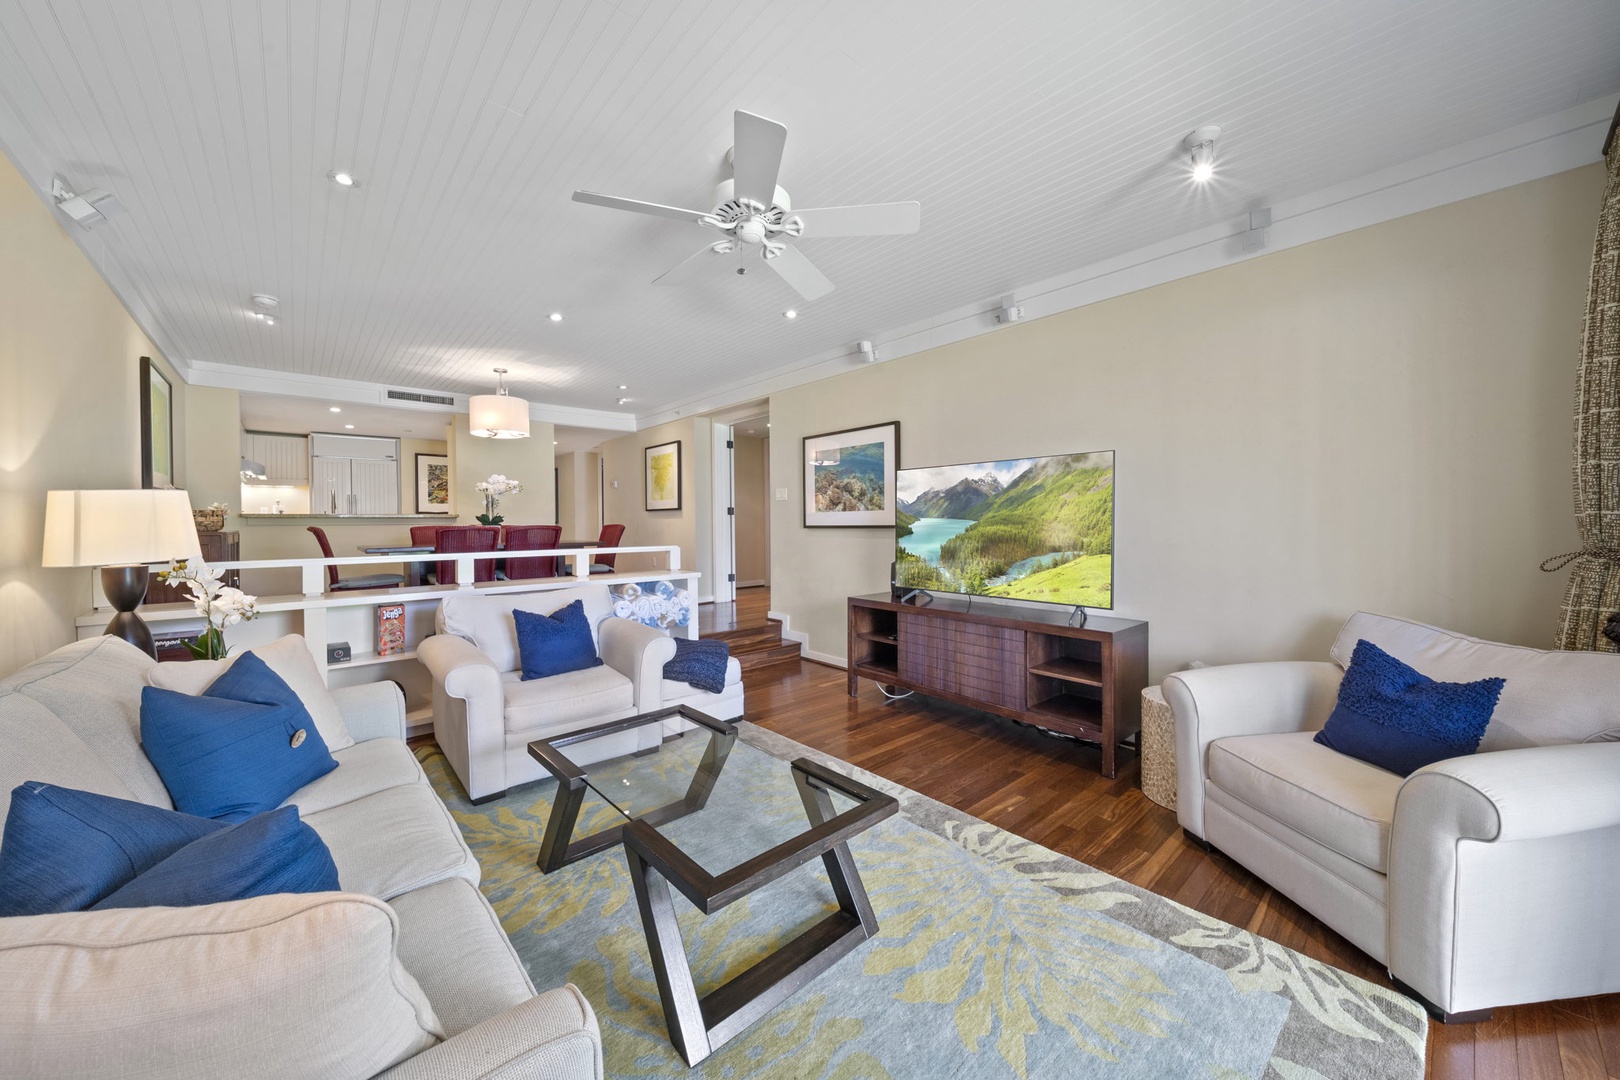 Kahuku Vacation Rentals, Turtle Bay Villas 114 - Furnished with queen pull out sofa, side chairs, and a flatscreen TV for fun nights of entertainment